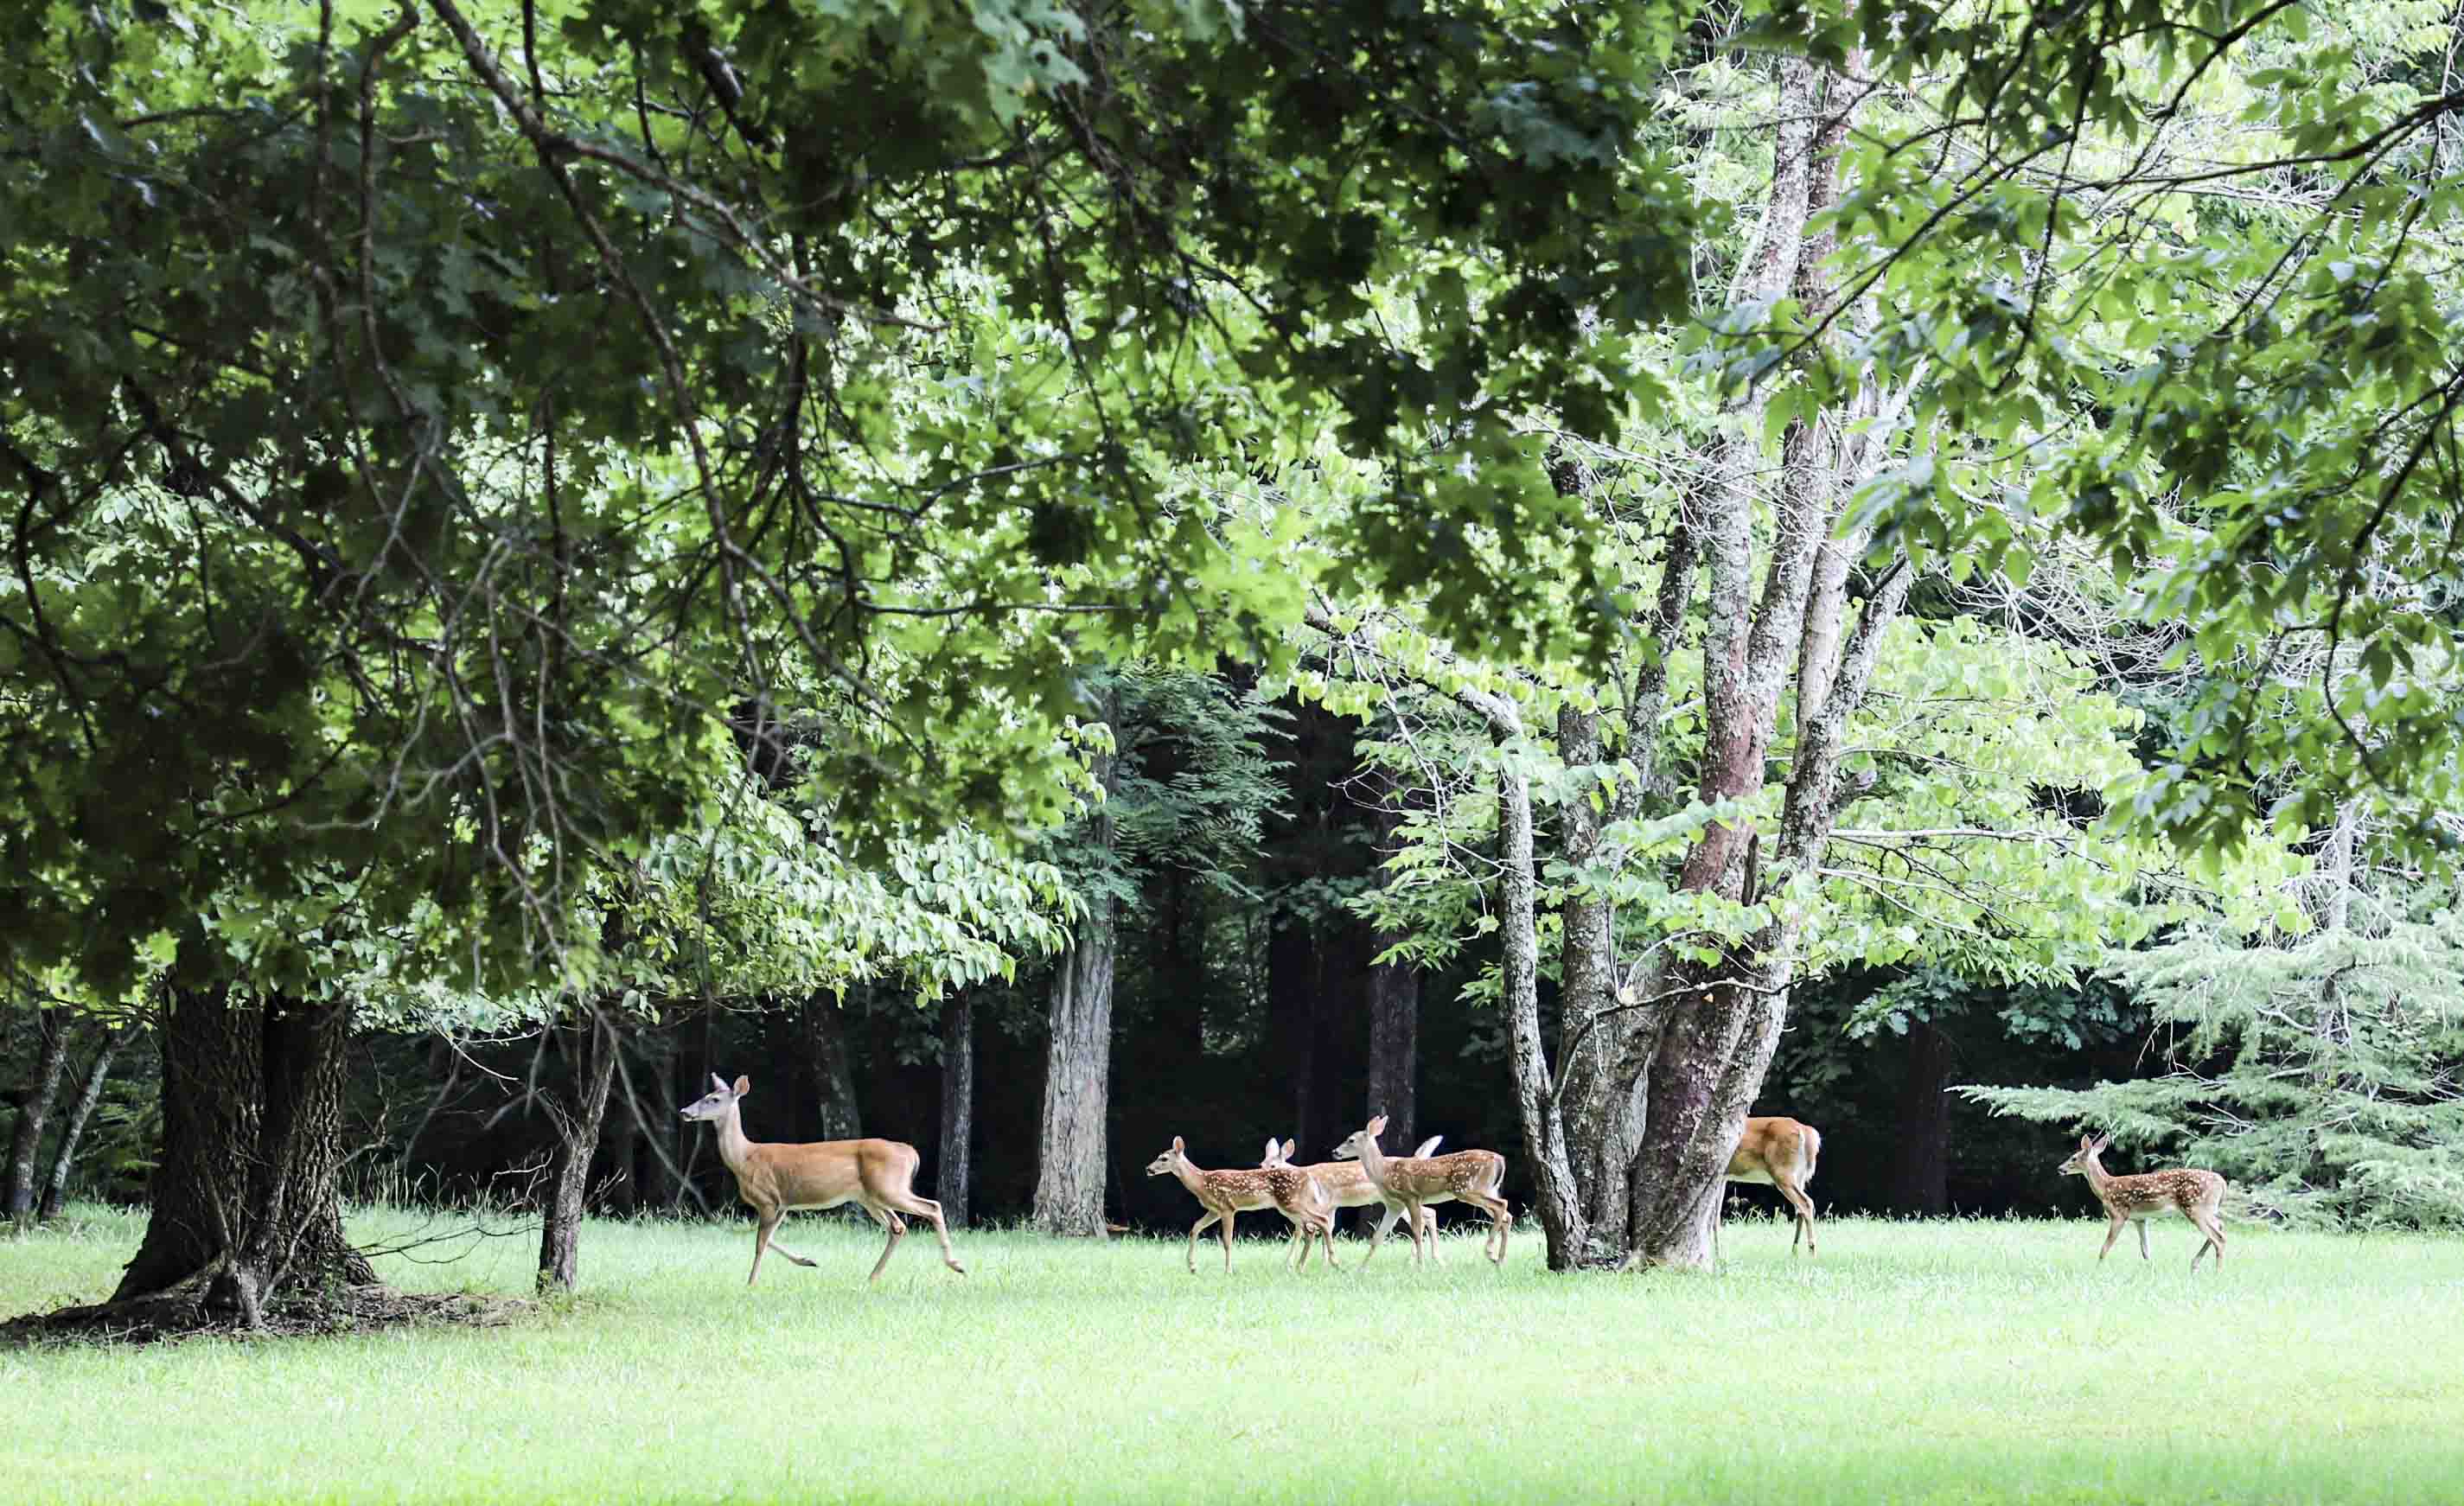 A mother deer and four fawns walk across a green lawn